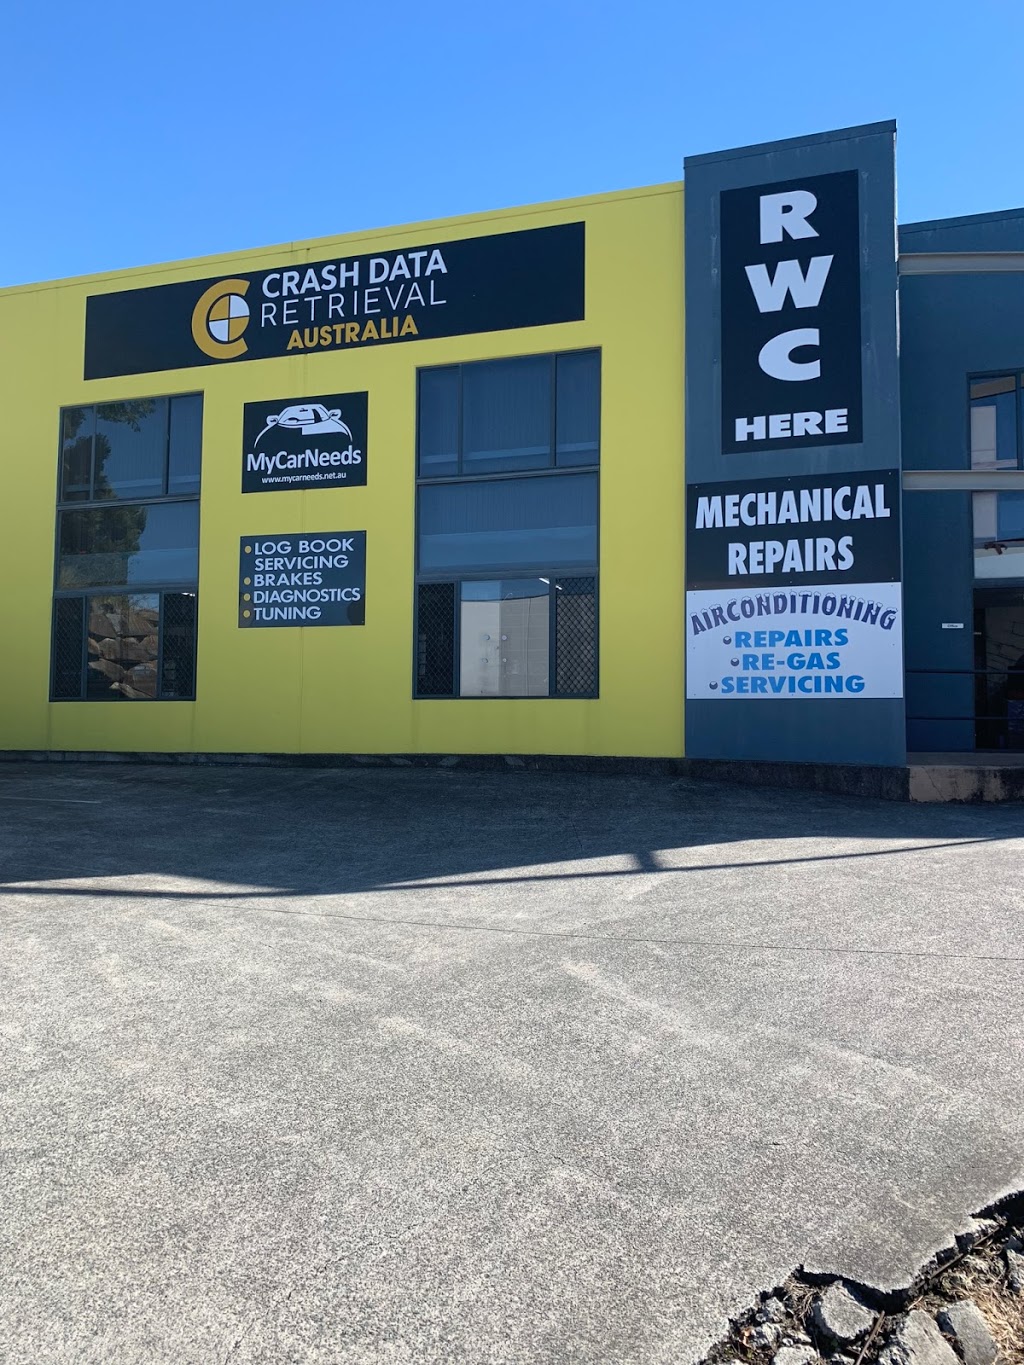 All Round TYRE And Mechanical | car repair | Unit 1/140 Millaroo Dr, Helensvale QLD 4209, Australia | 0755193454 OR +61 7 5519 3454